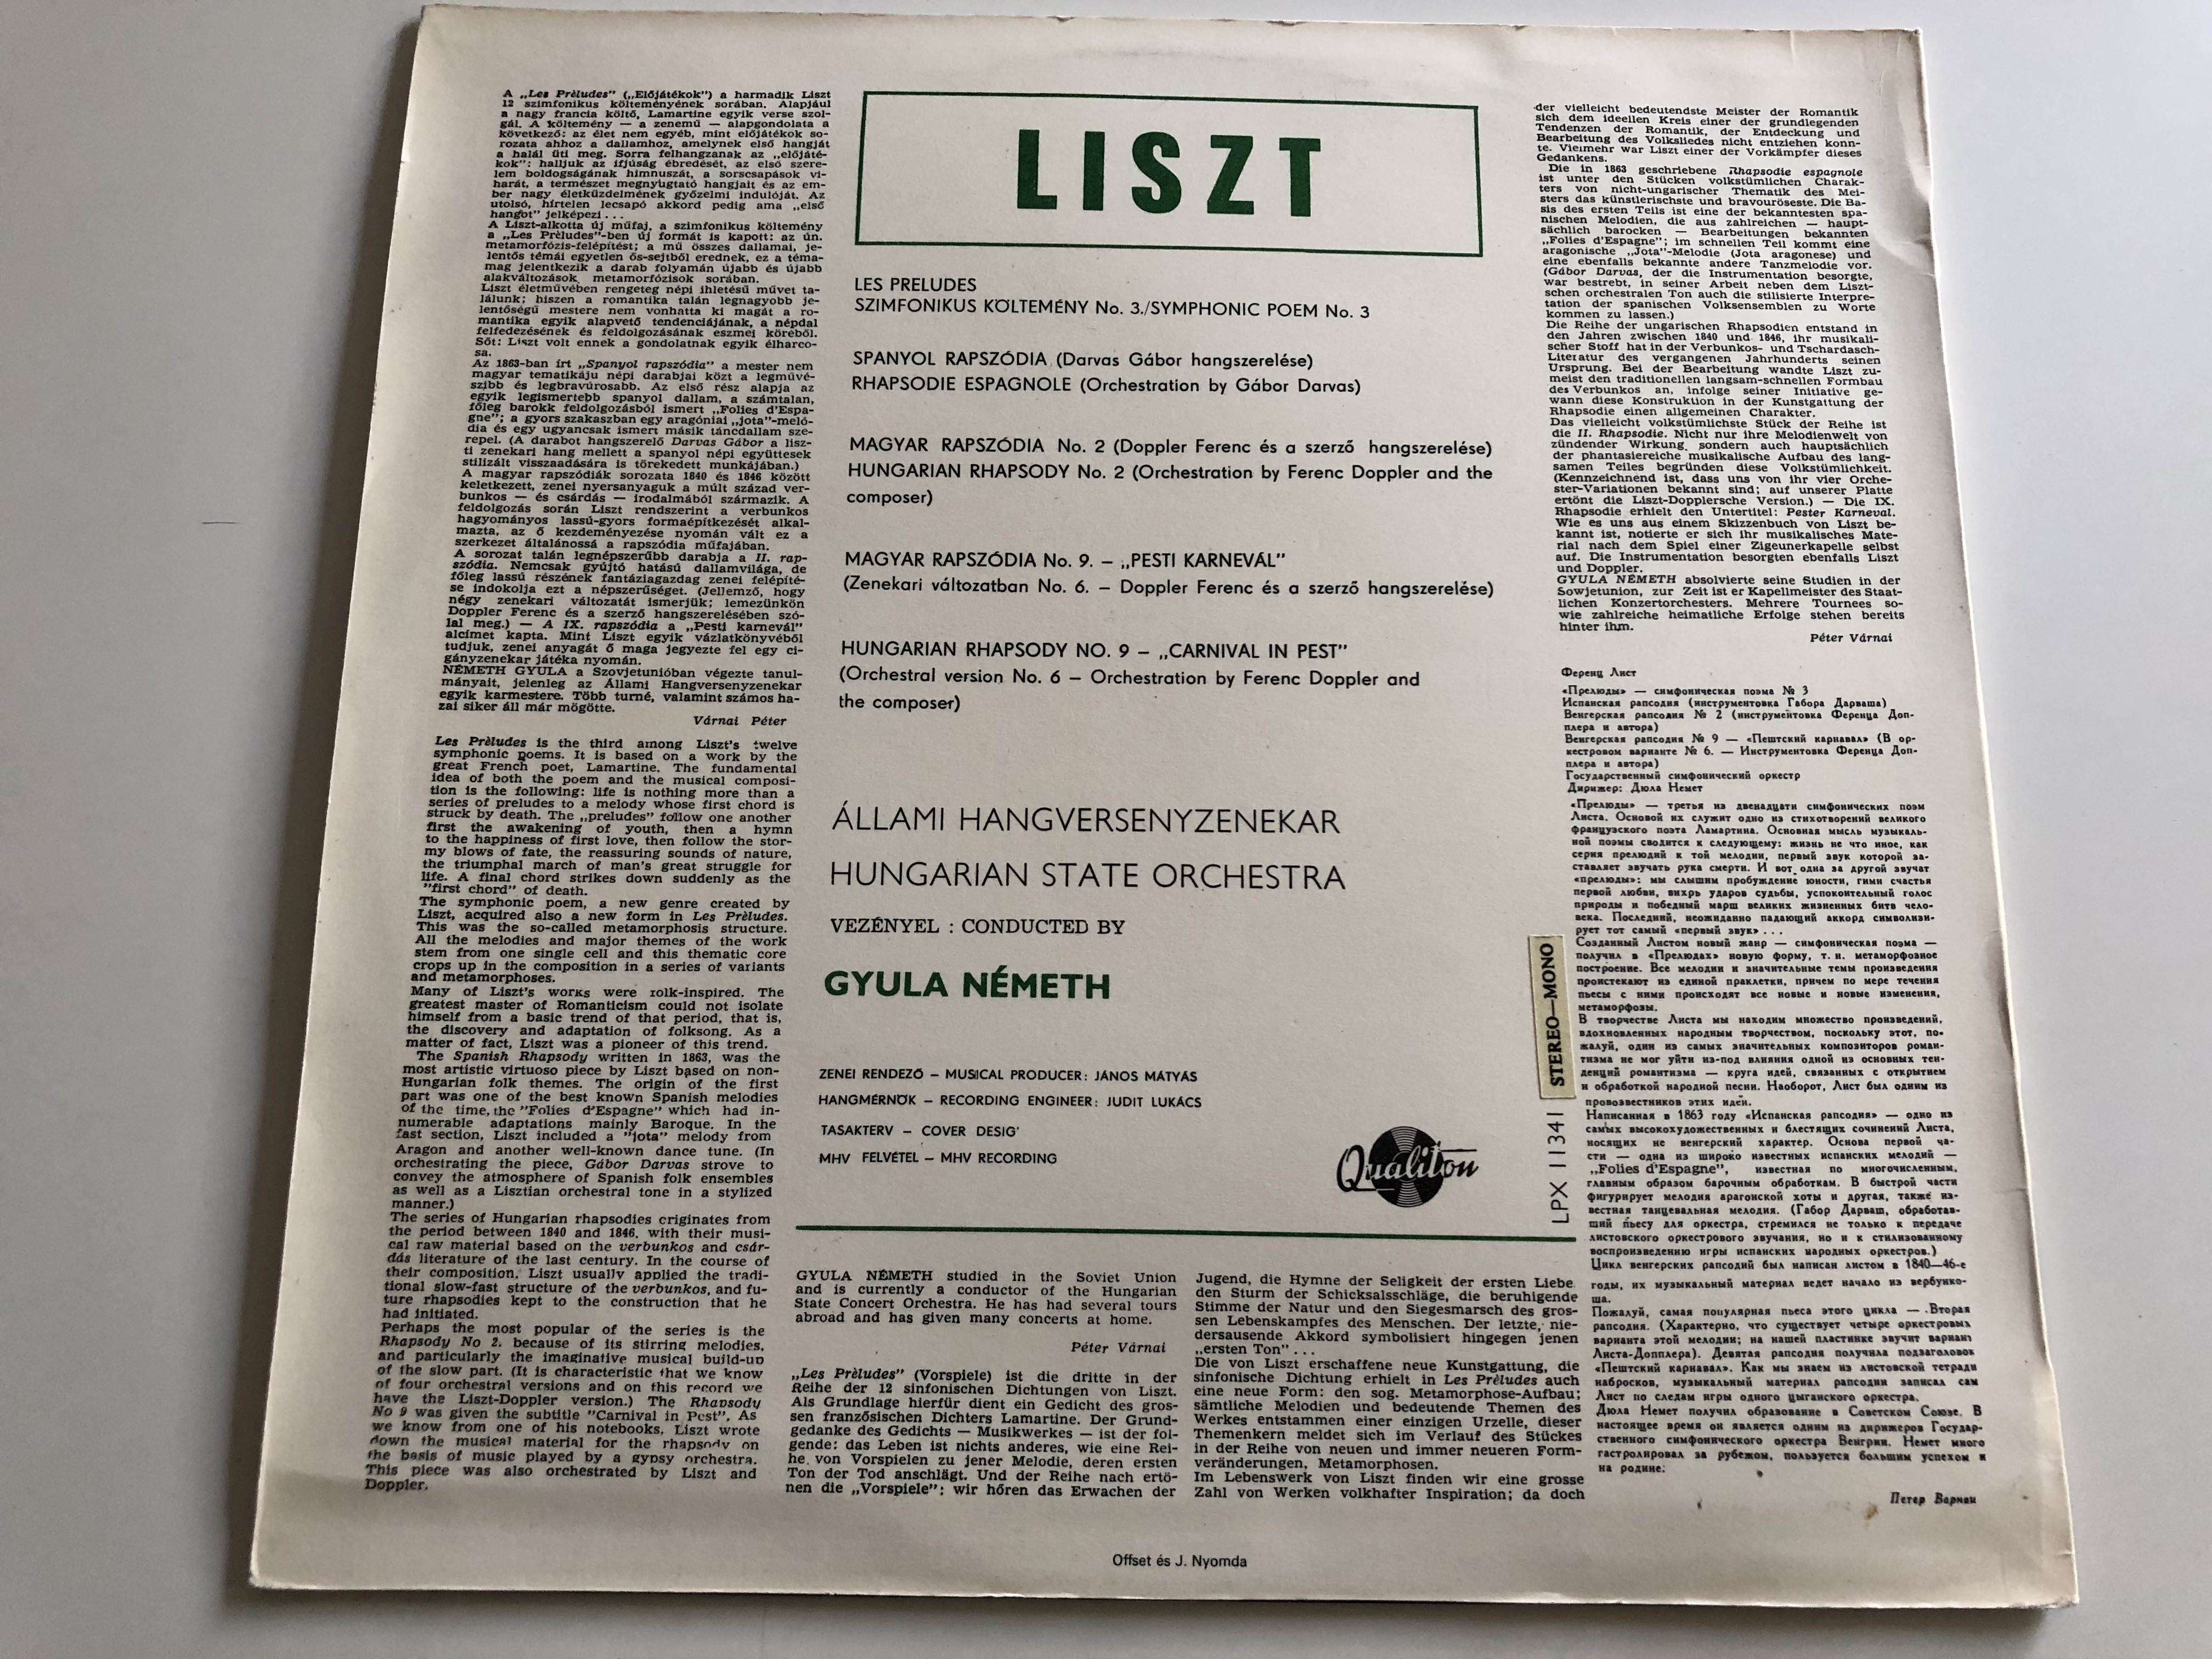 liszt-les-pr-ludes-rhapsodie-espagnole-hungarian-rhapsodies-nos-2-and-9-hungarian-state-orchestra-conducted-gyula-n-meth-qualiton-lp-stereo-mono-lpx-11341-2-.jpg